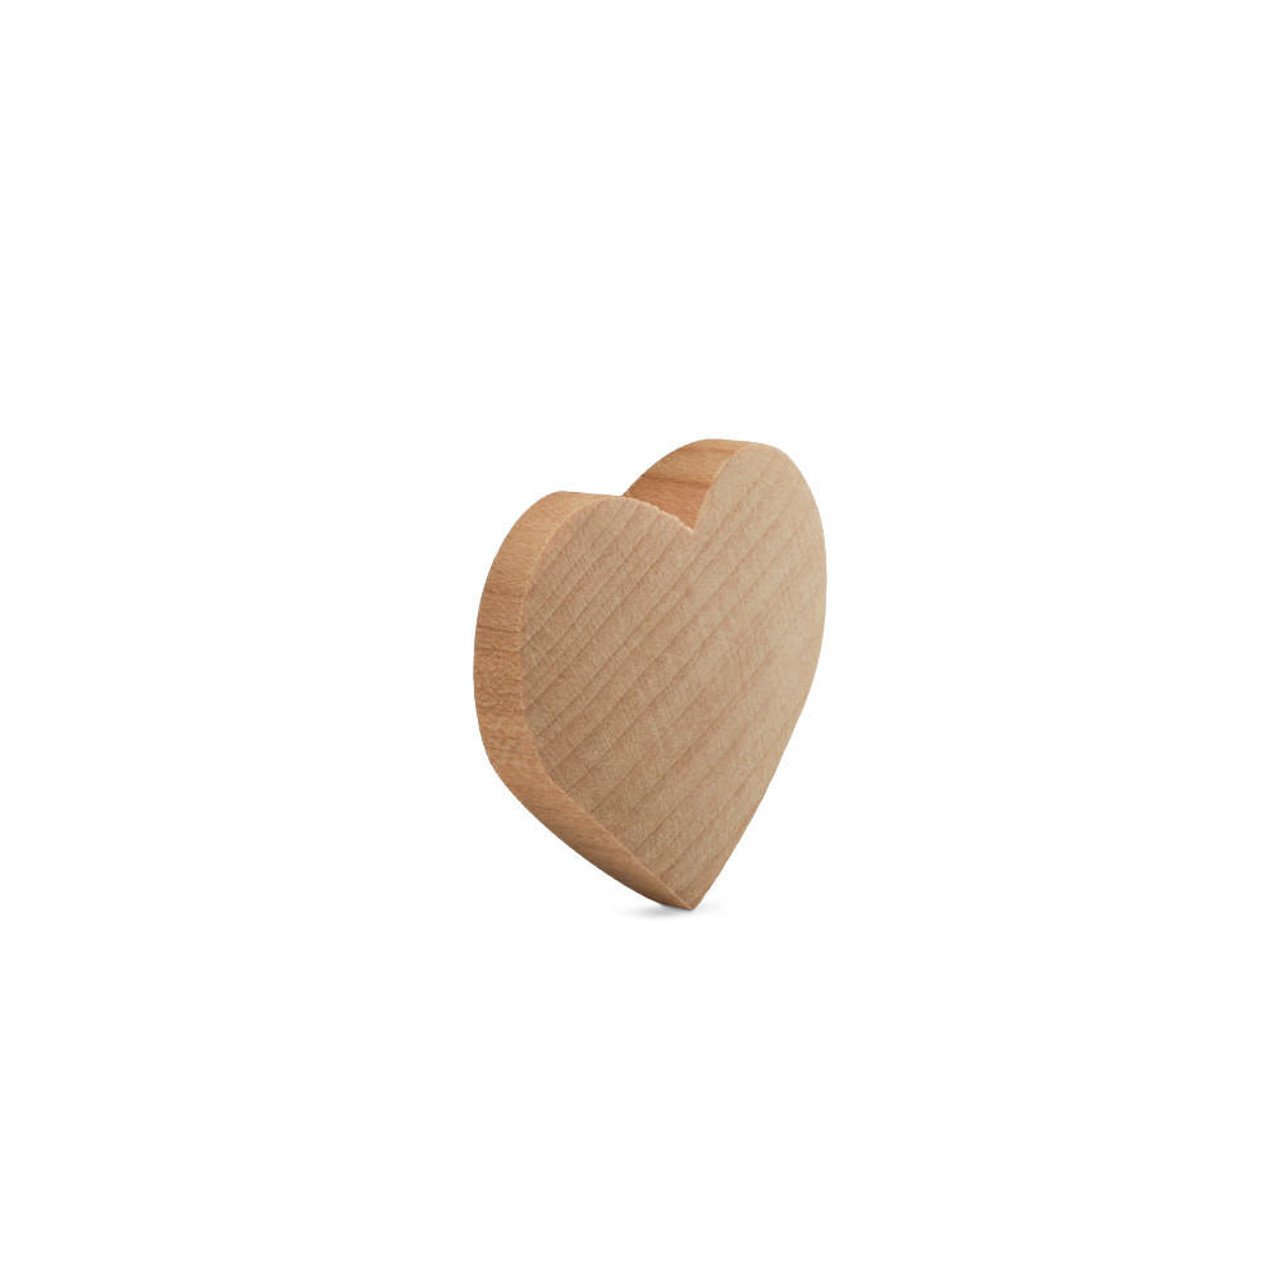 25 Miniature Wooden Hearts 1 small Wooden Hearts 